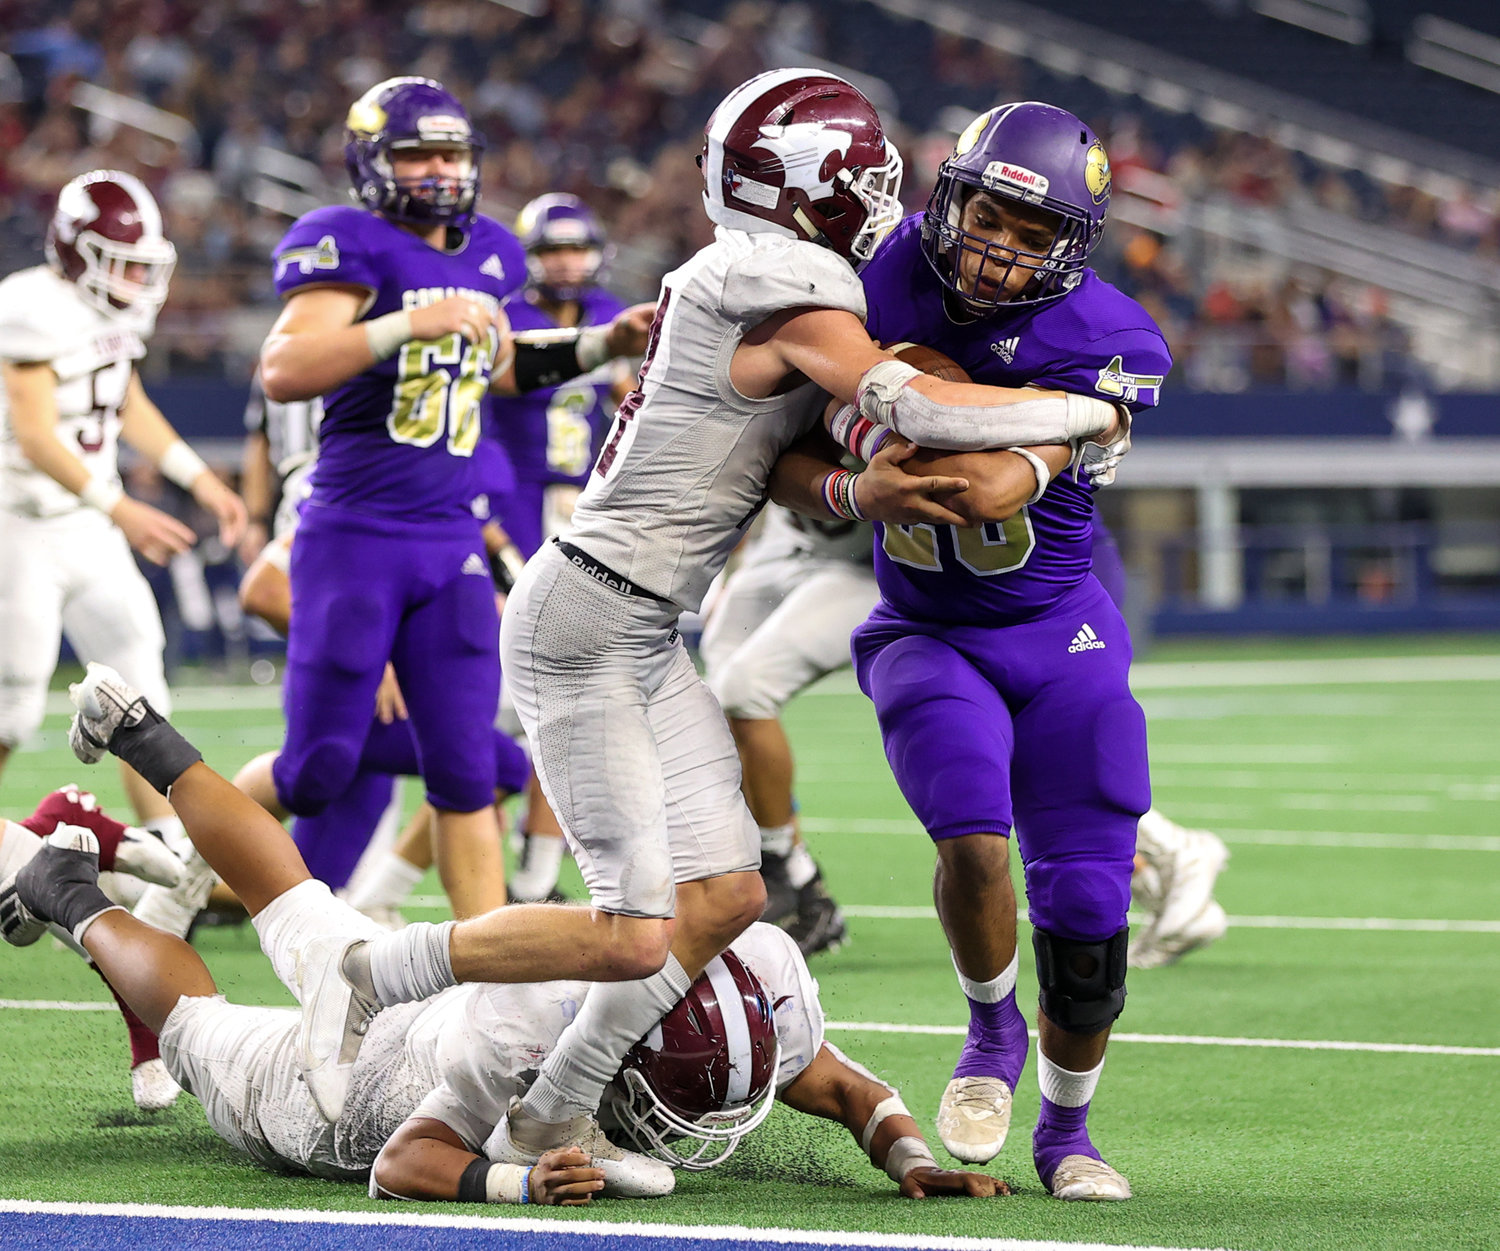 Shiner Comanches senior Makylin Burchell (28) carries the ball for a touchdown during the Class 2A Division I state football championship game between Shiner and Hawley on December 15, 2021 in Arlington, Texas.